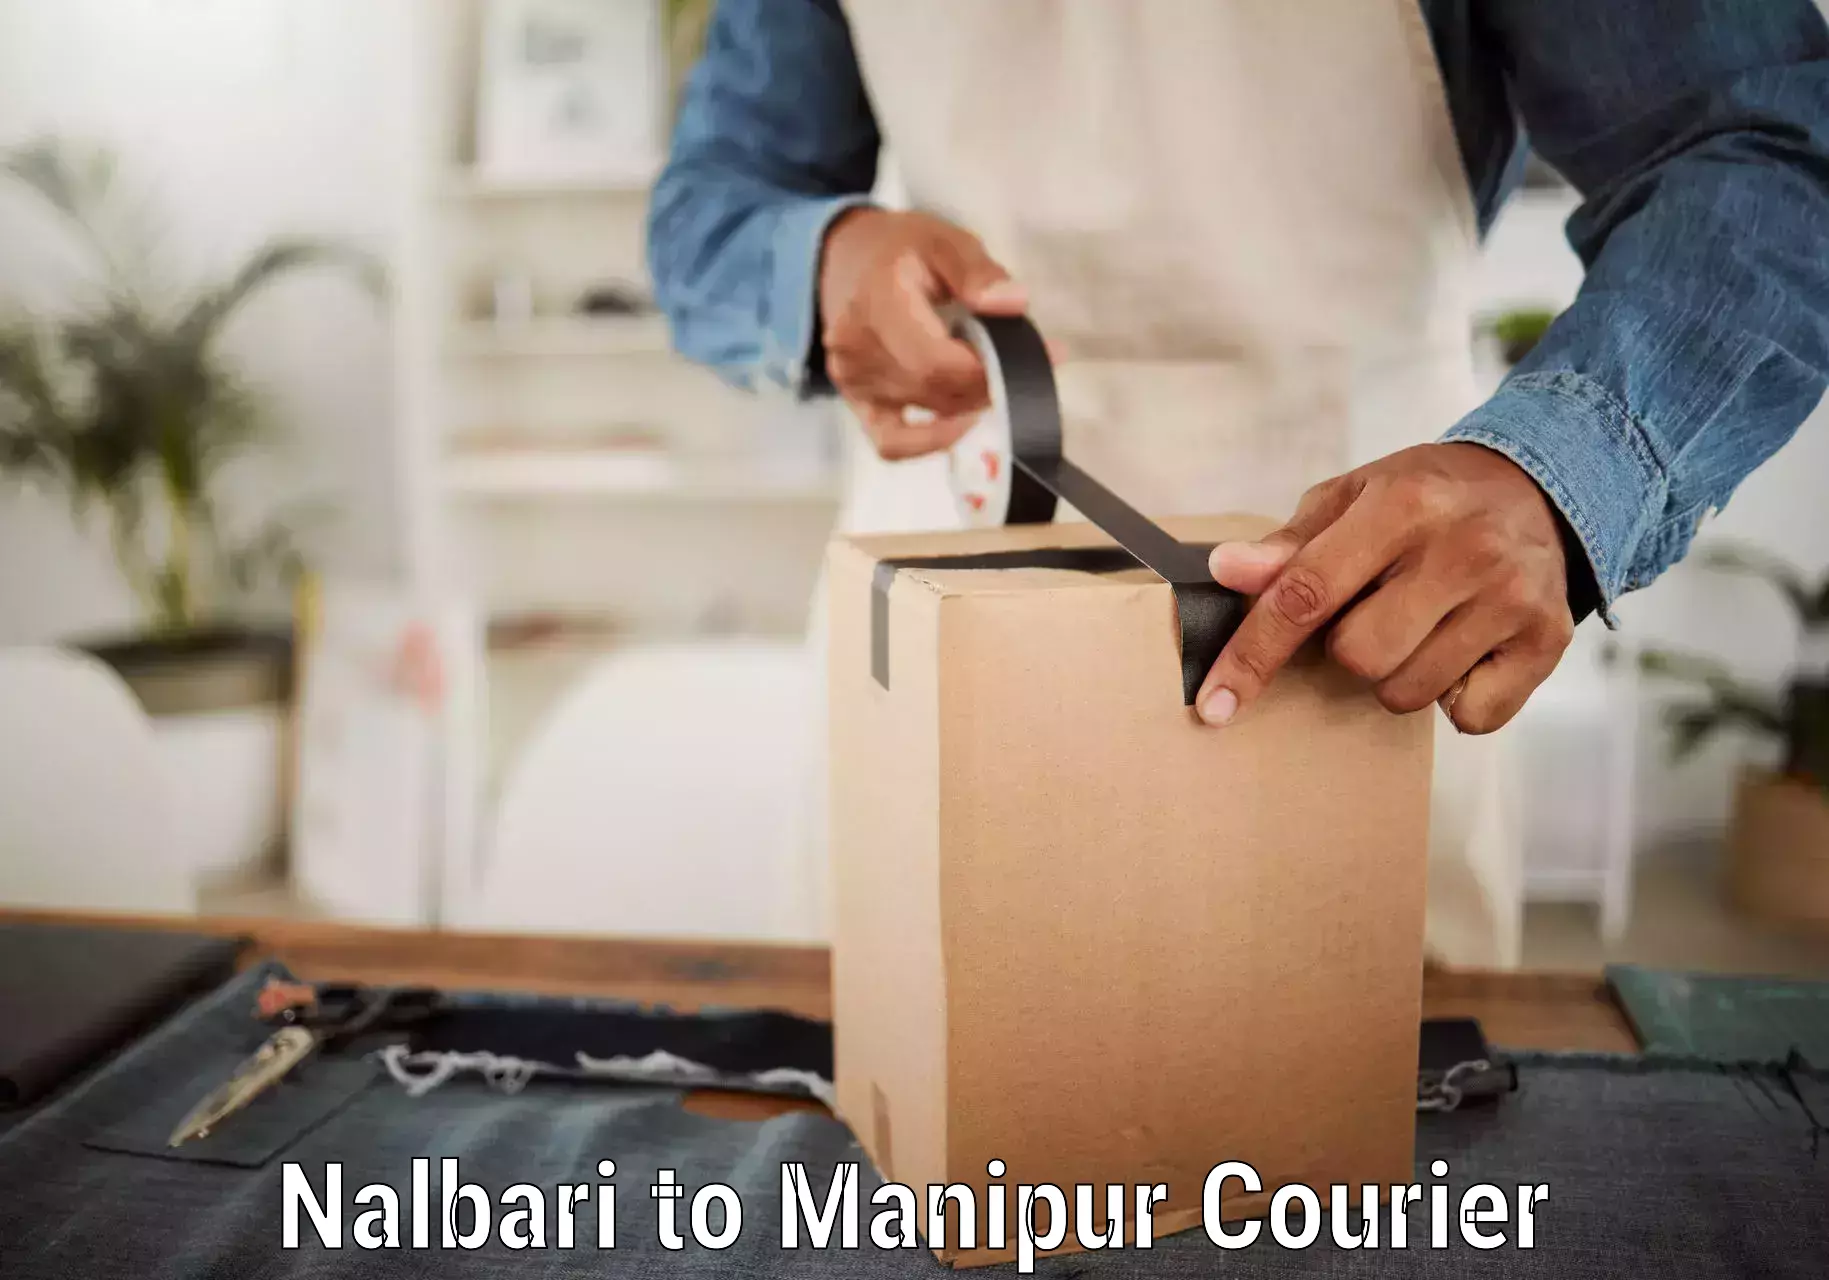 Nationwide courier service in Nalbari to Manipur